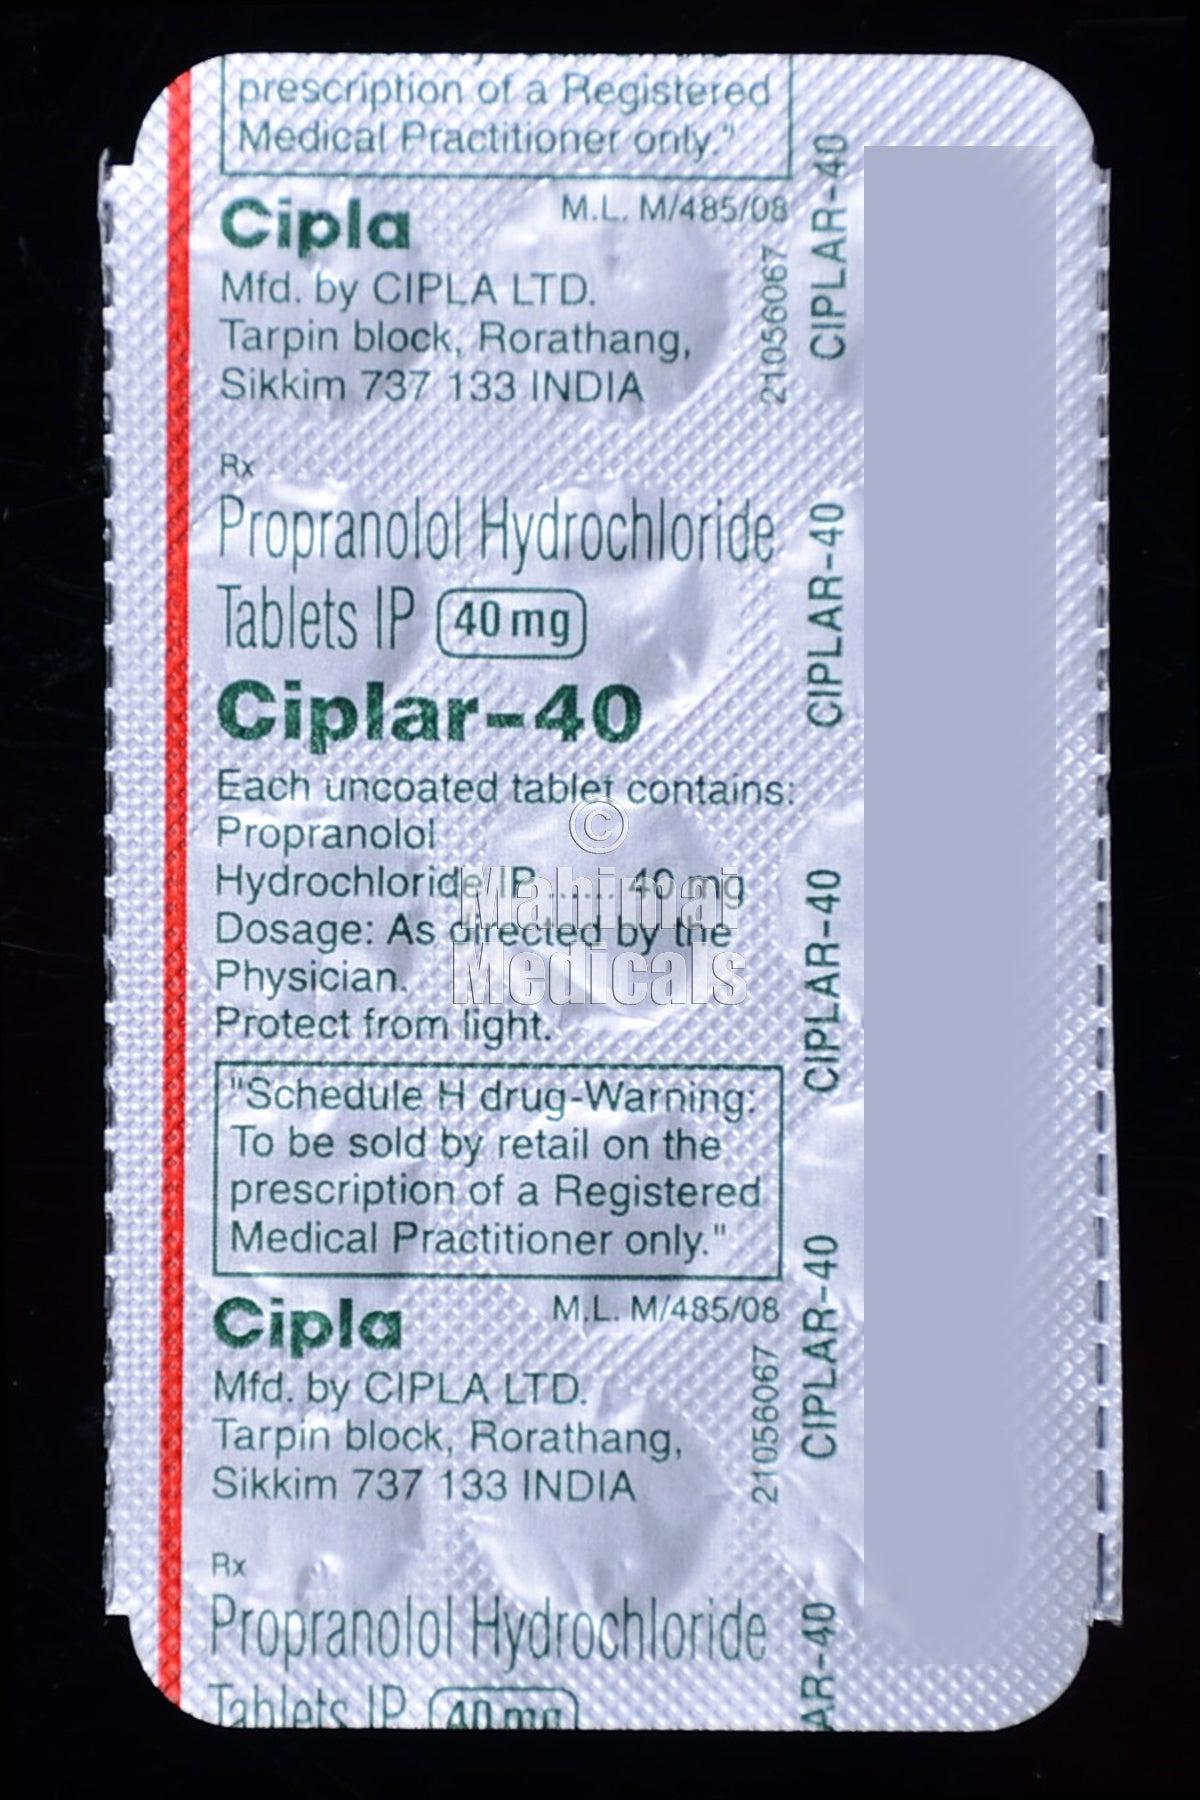 Ciplar 40 MG Tablet - Uses, Dosage, Side Effects, Price